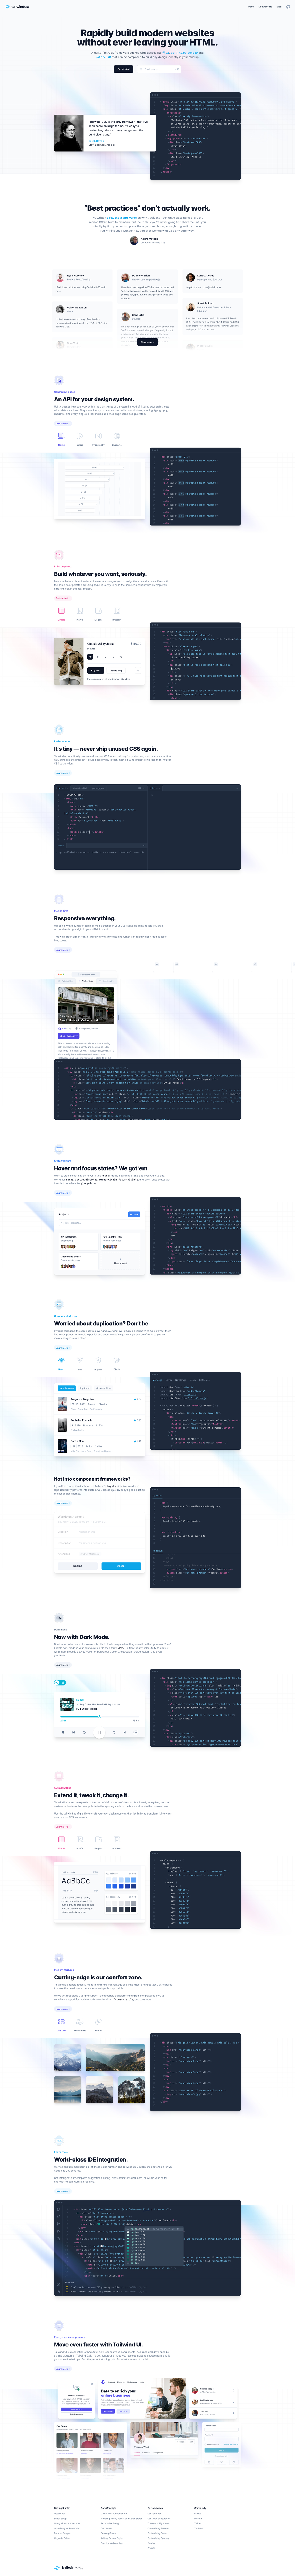 Tailwind CSS Landing Page Example: Rapidly build modern websites without ever leaving your HTML.